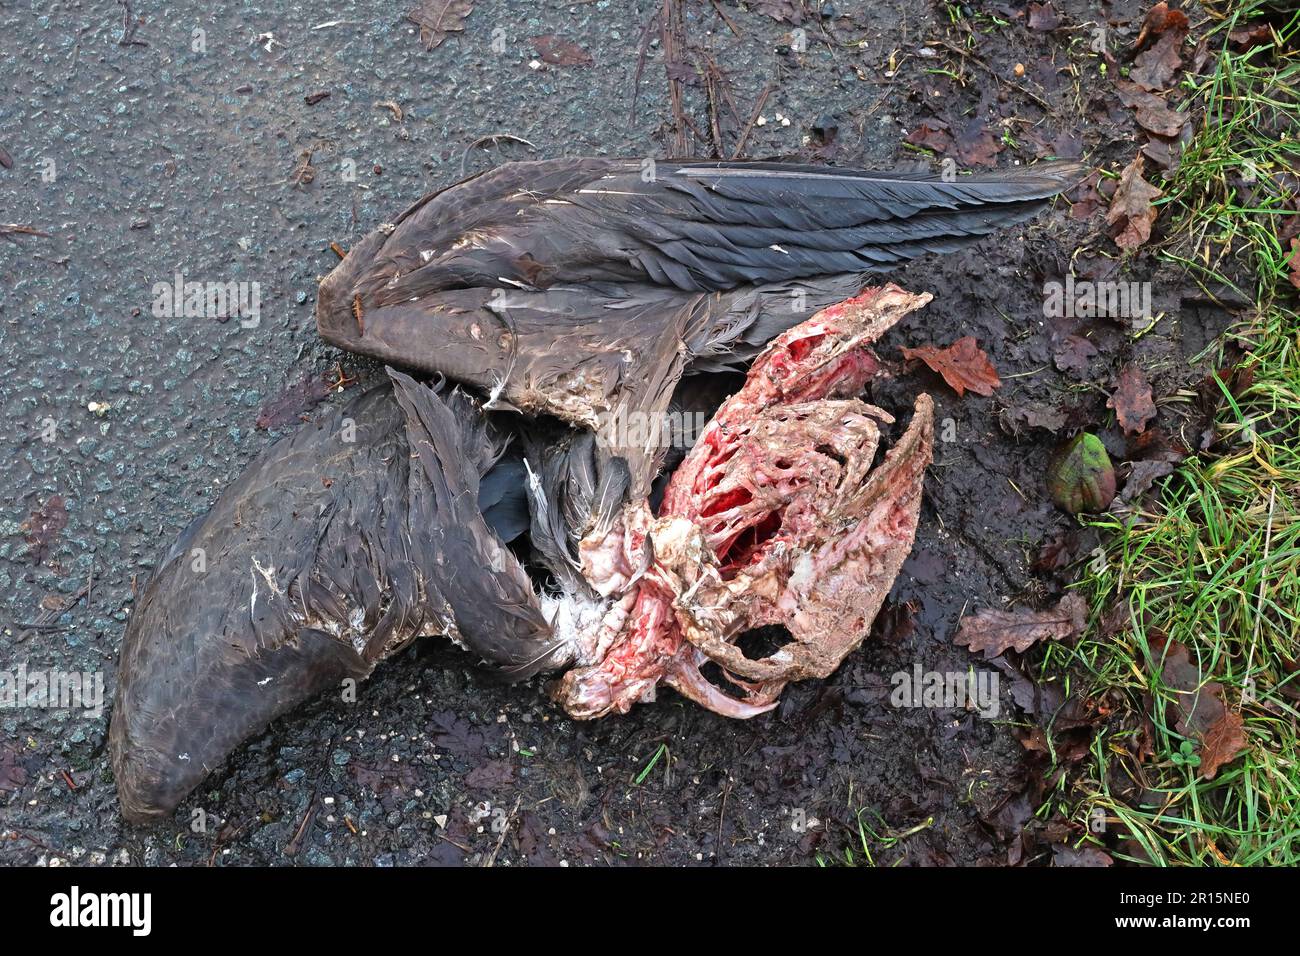 Dead bird remains, attacked by bird of prey, Cheshire, England, UK, WA4 Stock Photo